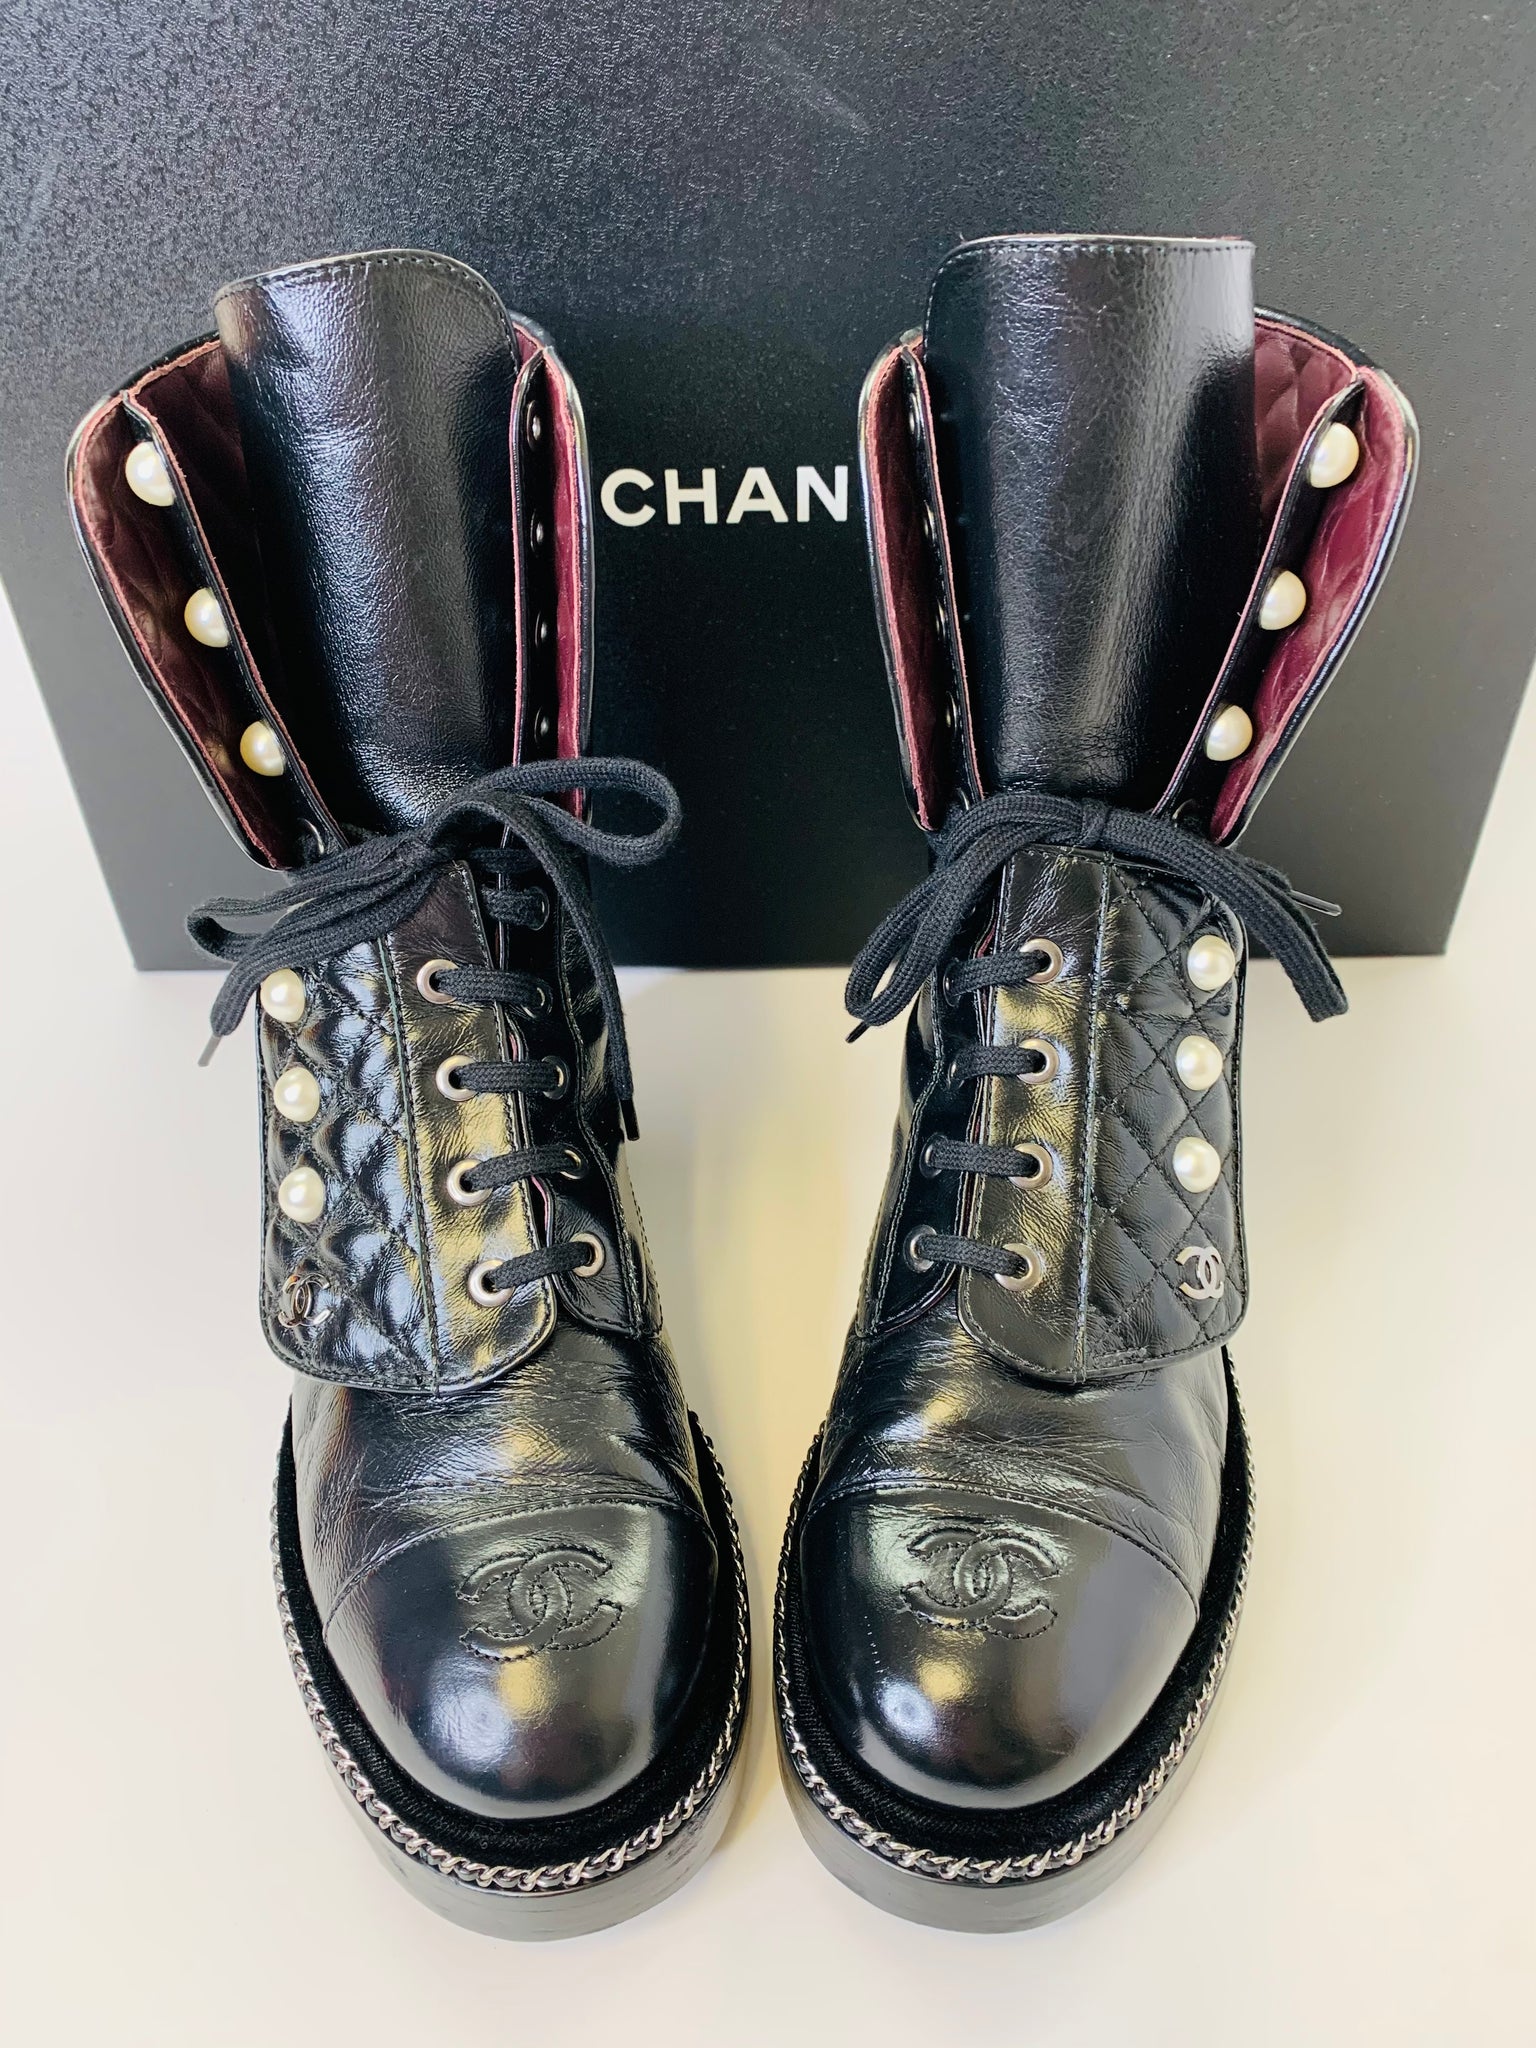 CHANEL, Shoes, Chanel Patent Velvet Ankle Booties Size 37 7